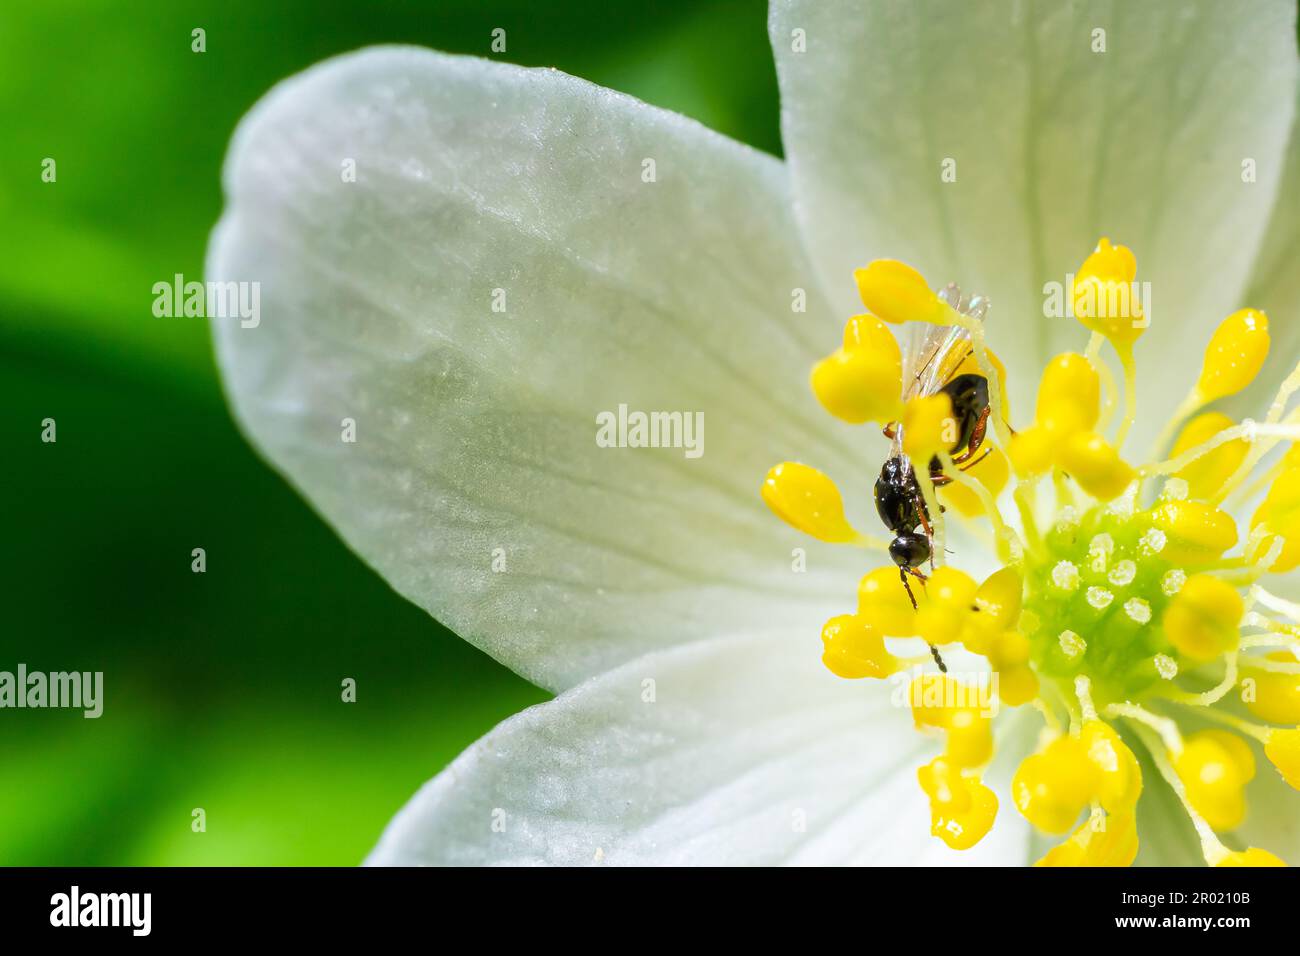 close up photo of hylaeus or bee on the White flower with green leaves in the garden. Stock Photo